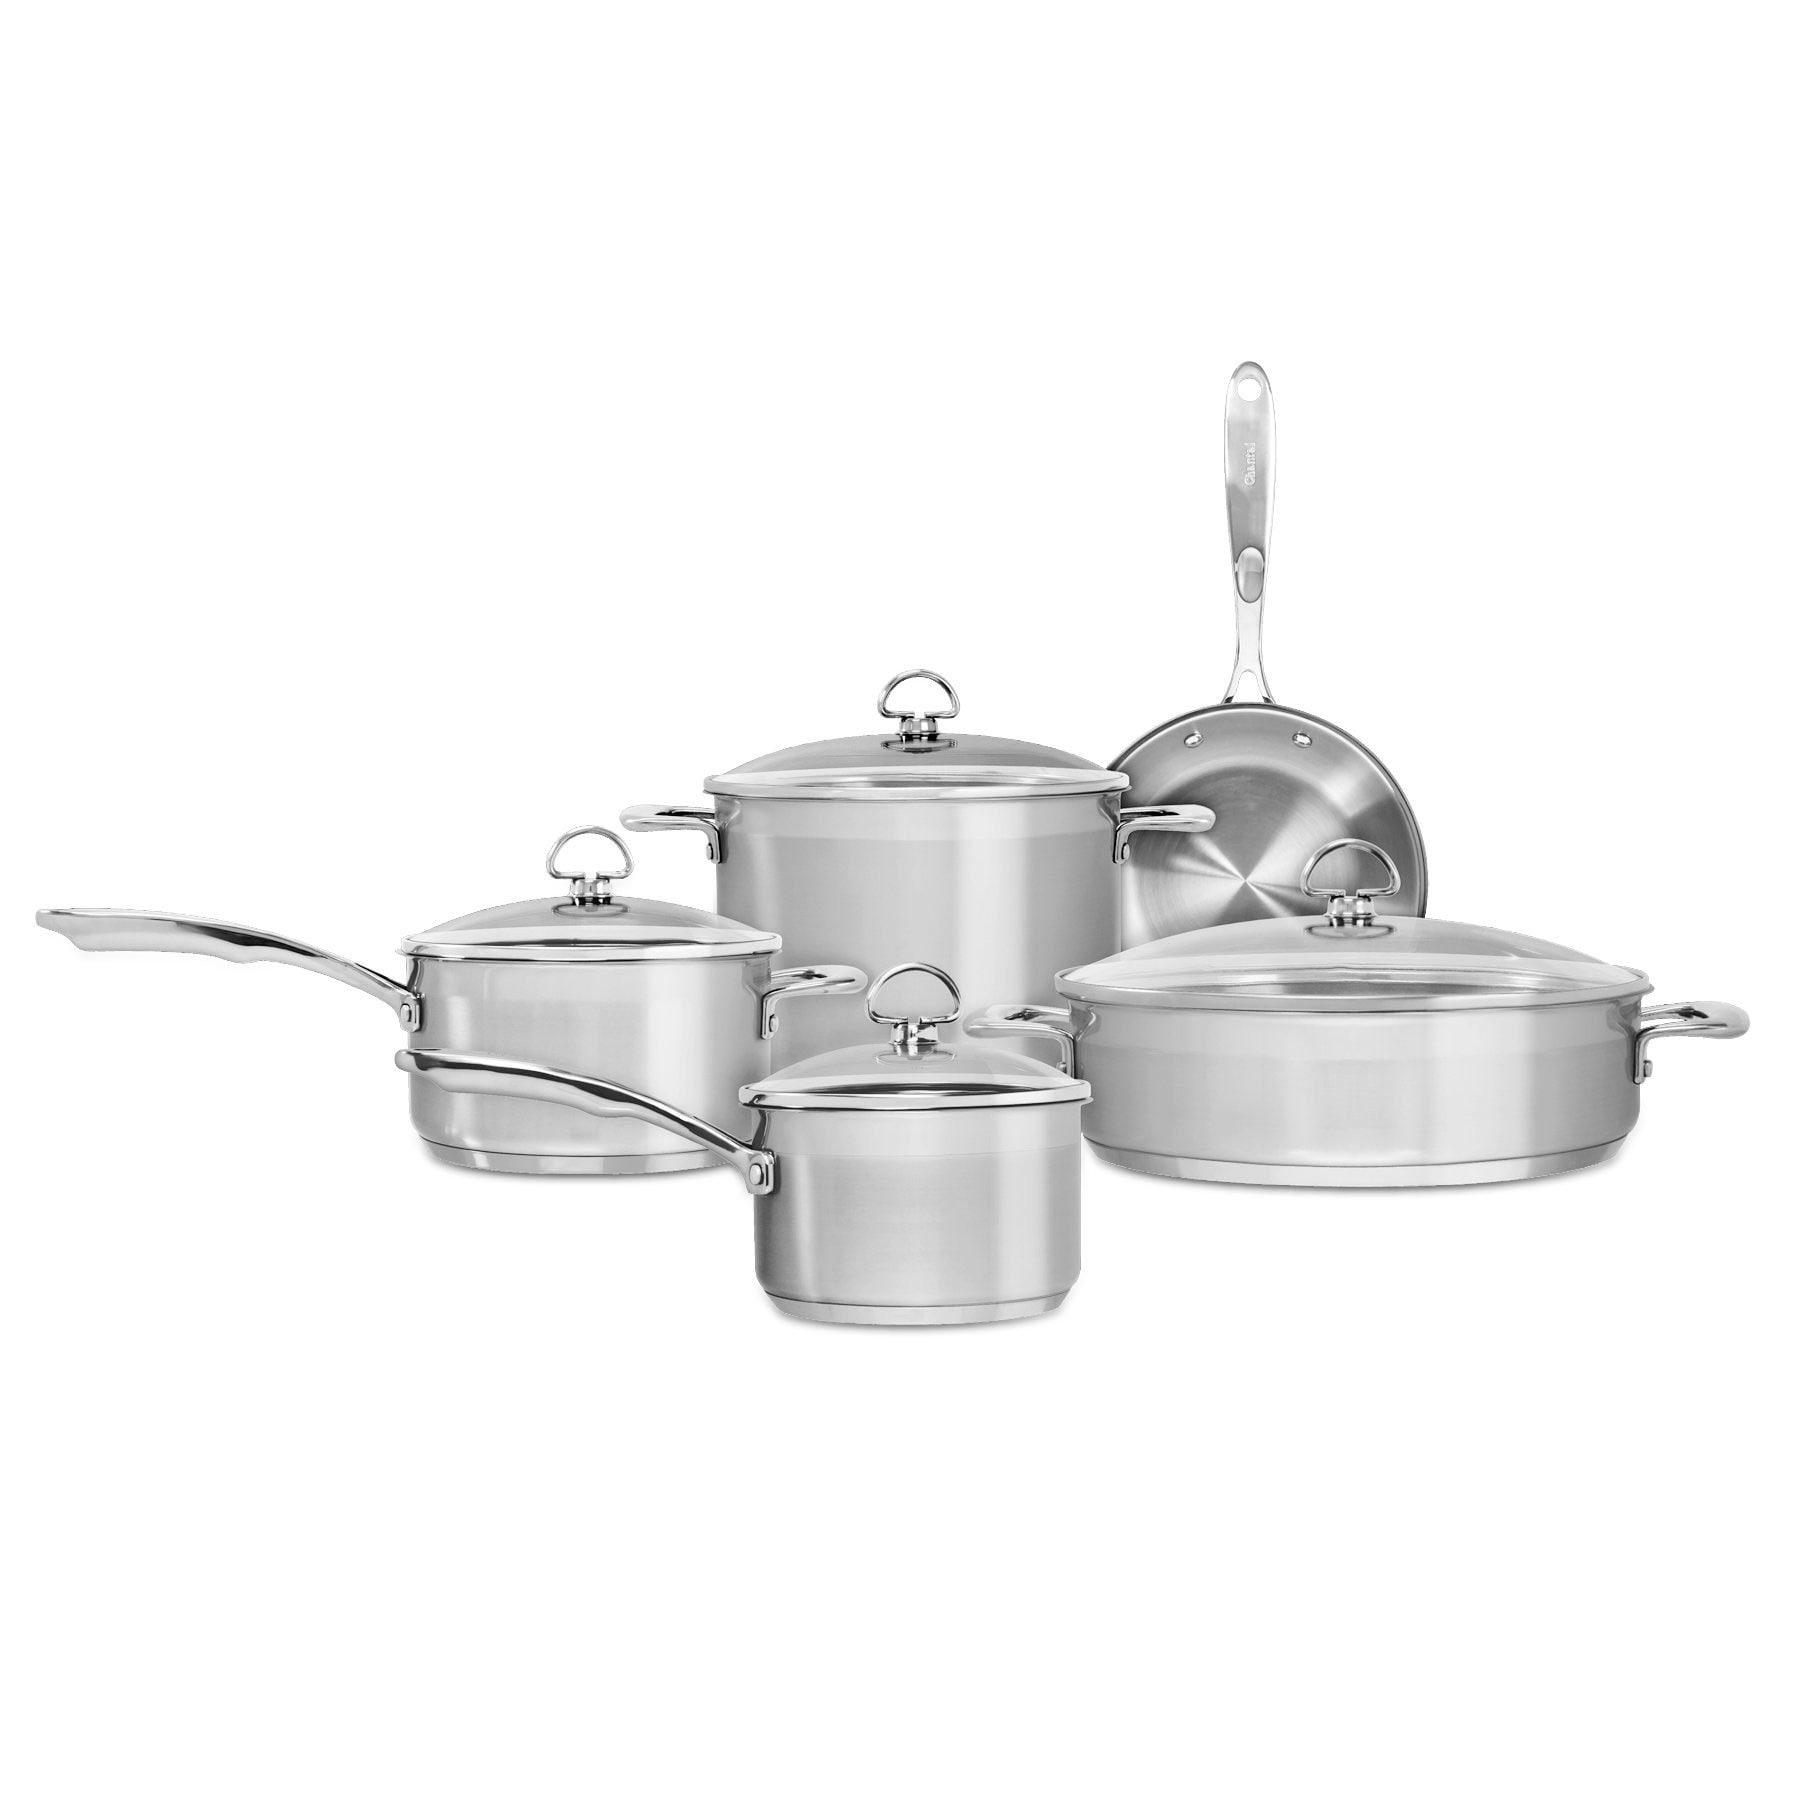 Chantal 3.Clad 5-Quart Sauteuse with Glass Lid ,Stainless